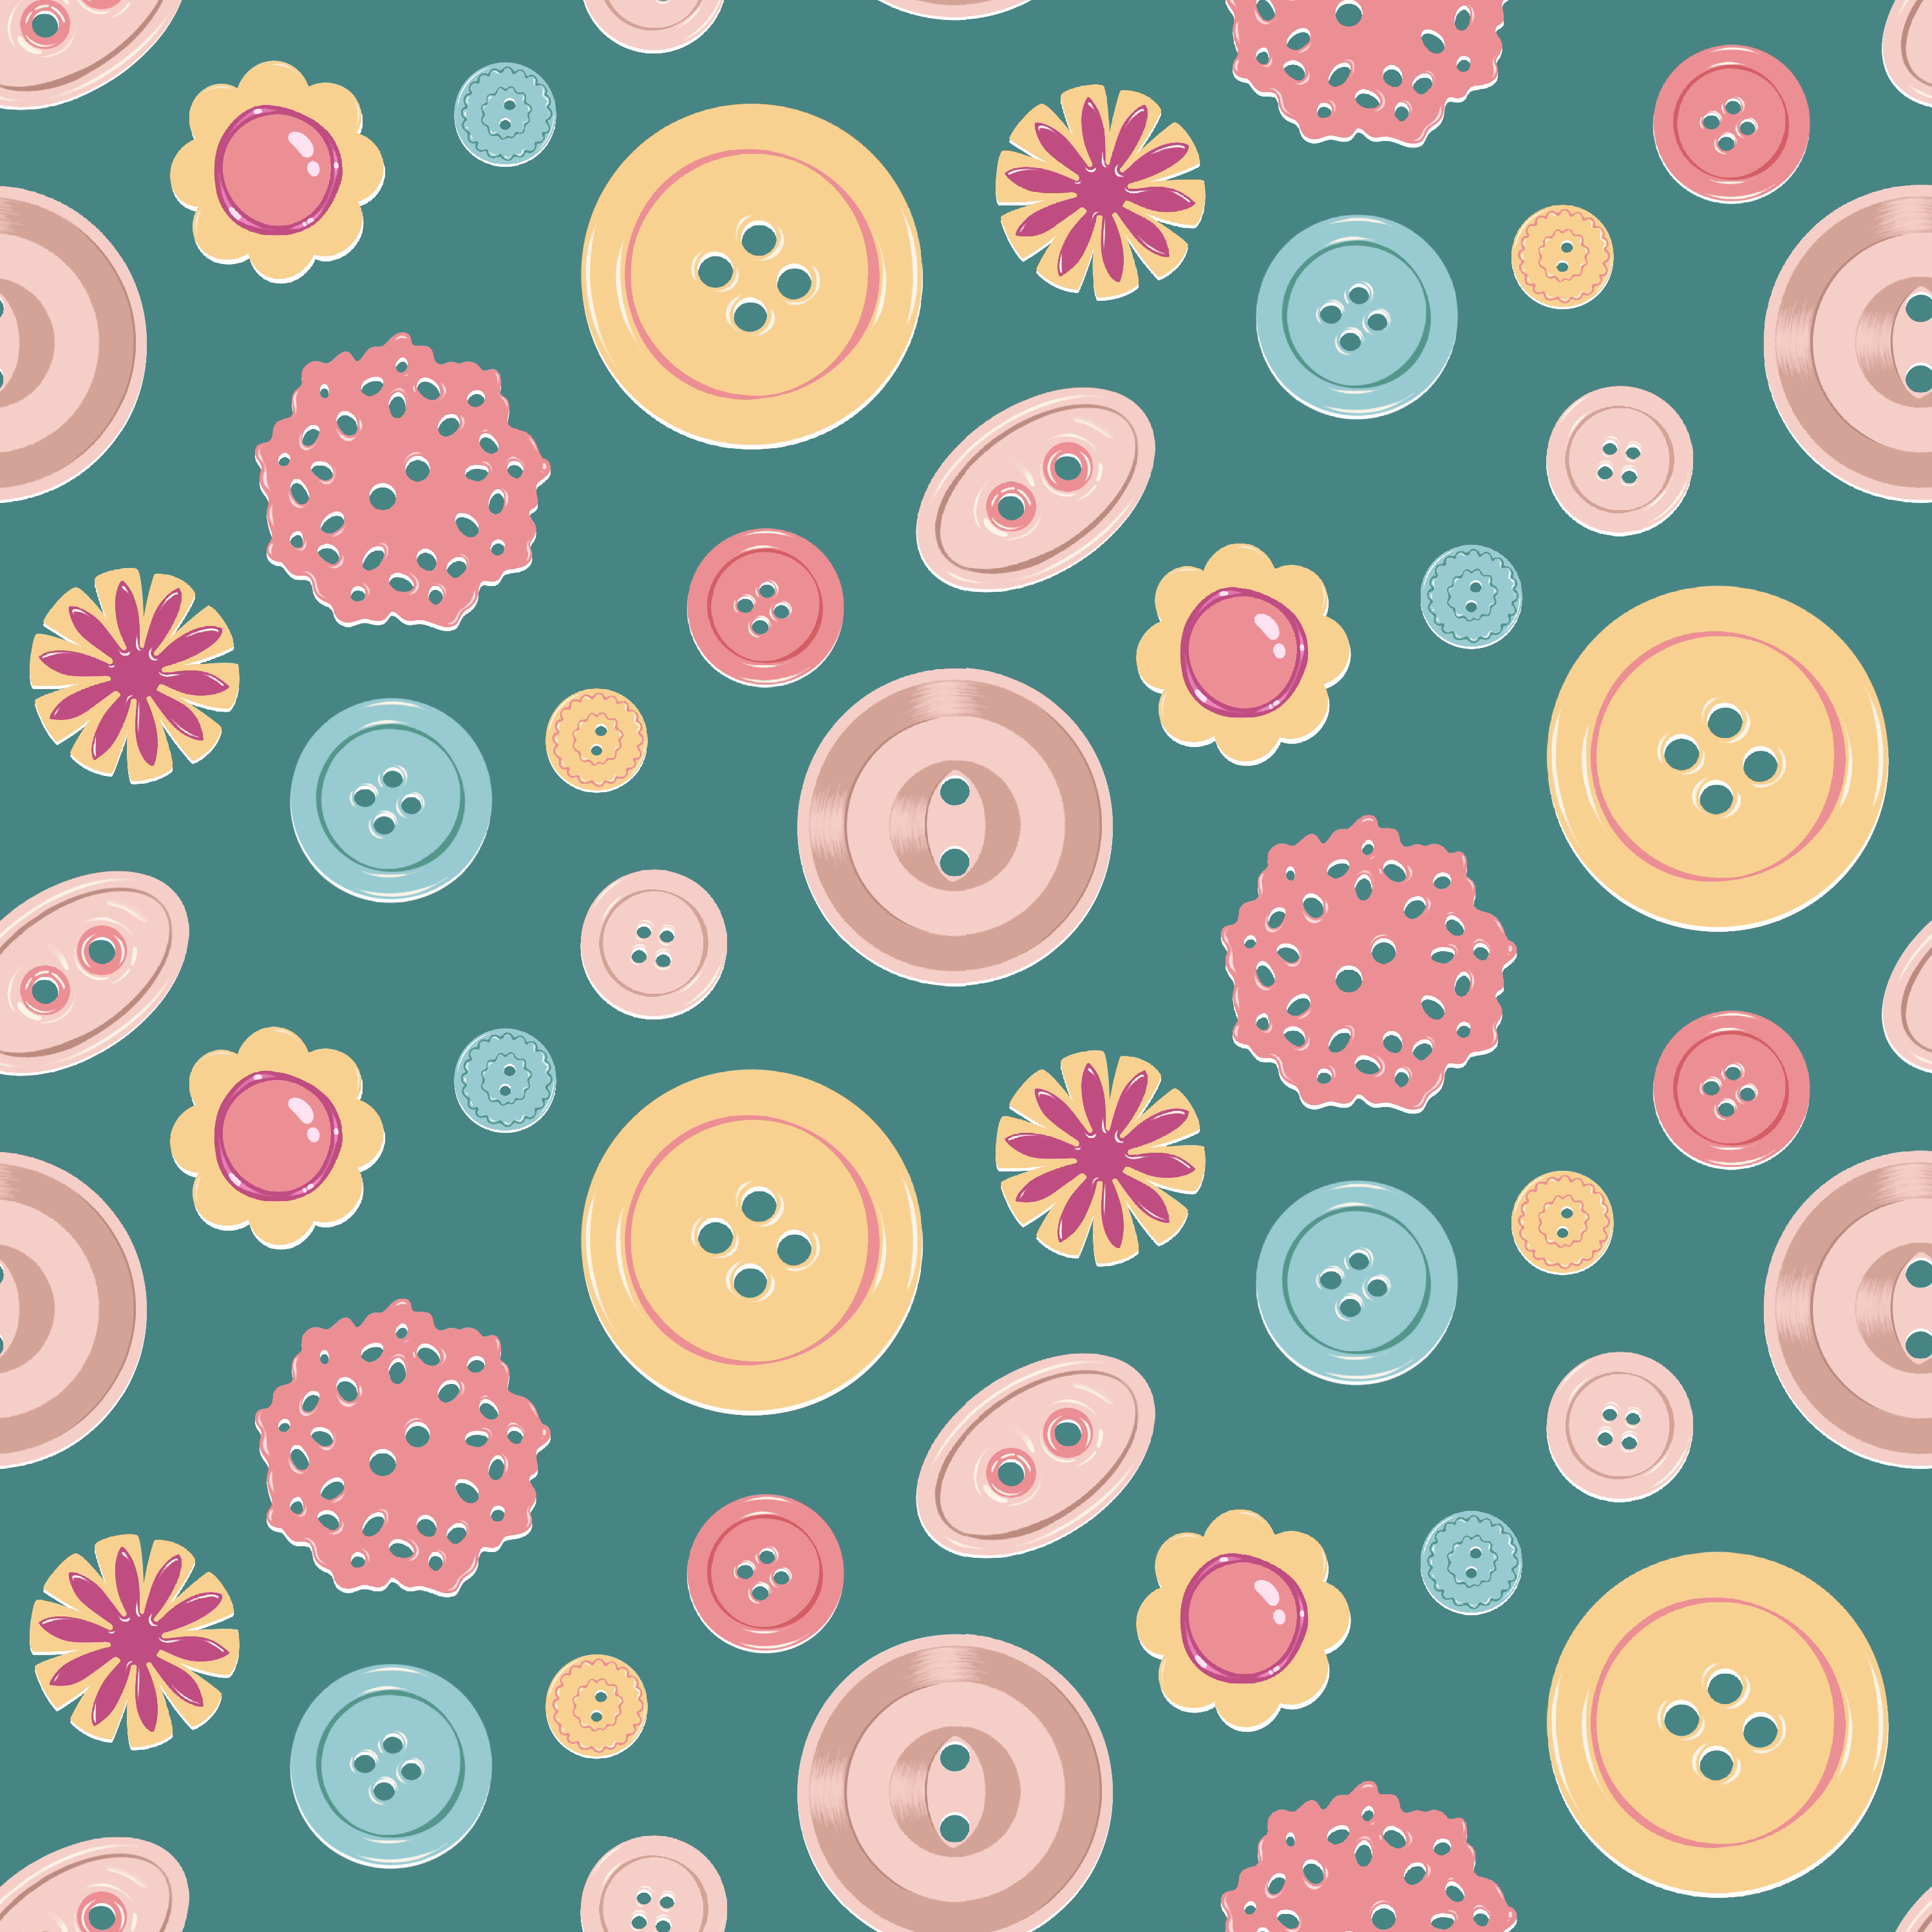 Pattern of buttons